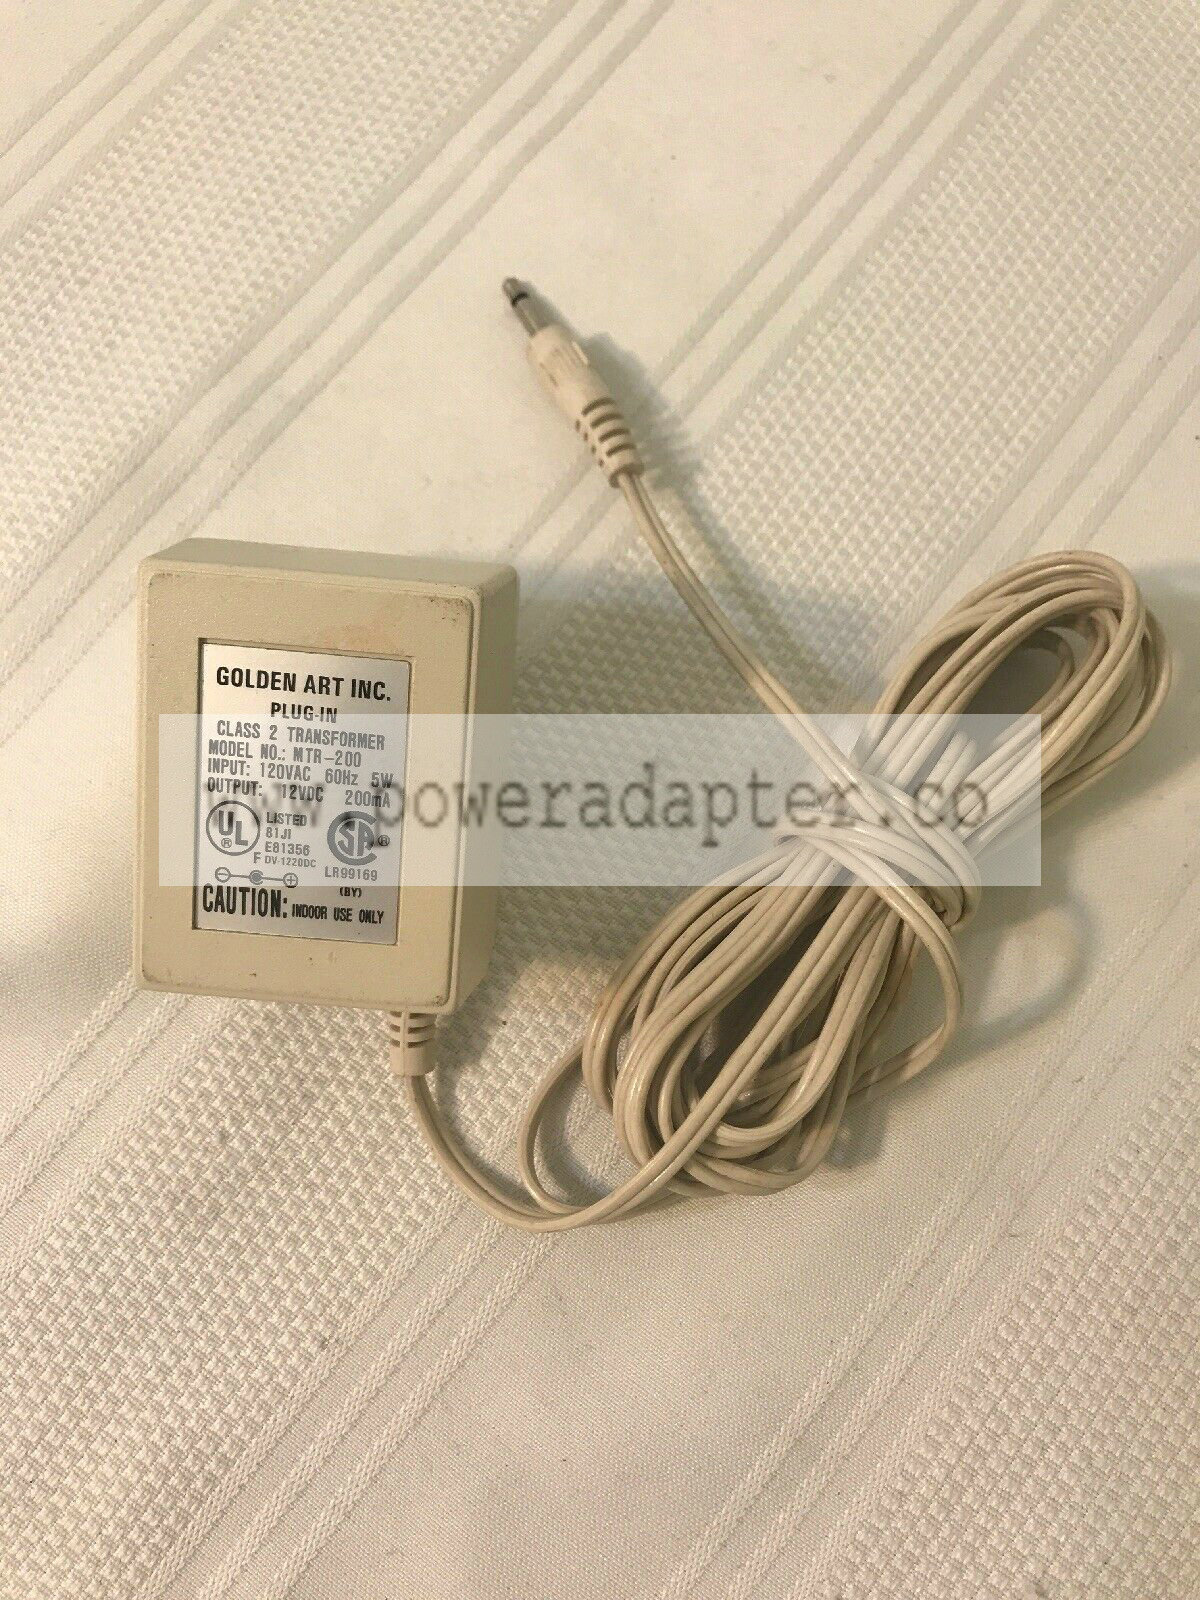 Golden Art AC Adapter MTR-200 Class 2 Transformer Power Supply Output: 12V 200mA Description Item is in very good c - Click Image to Close